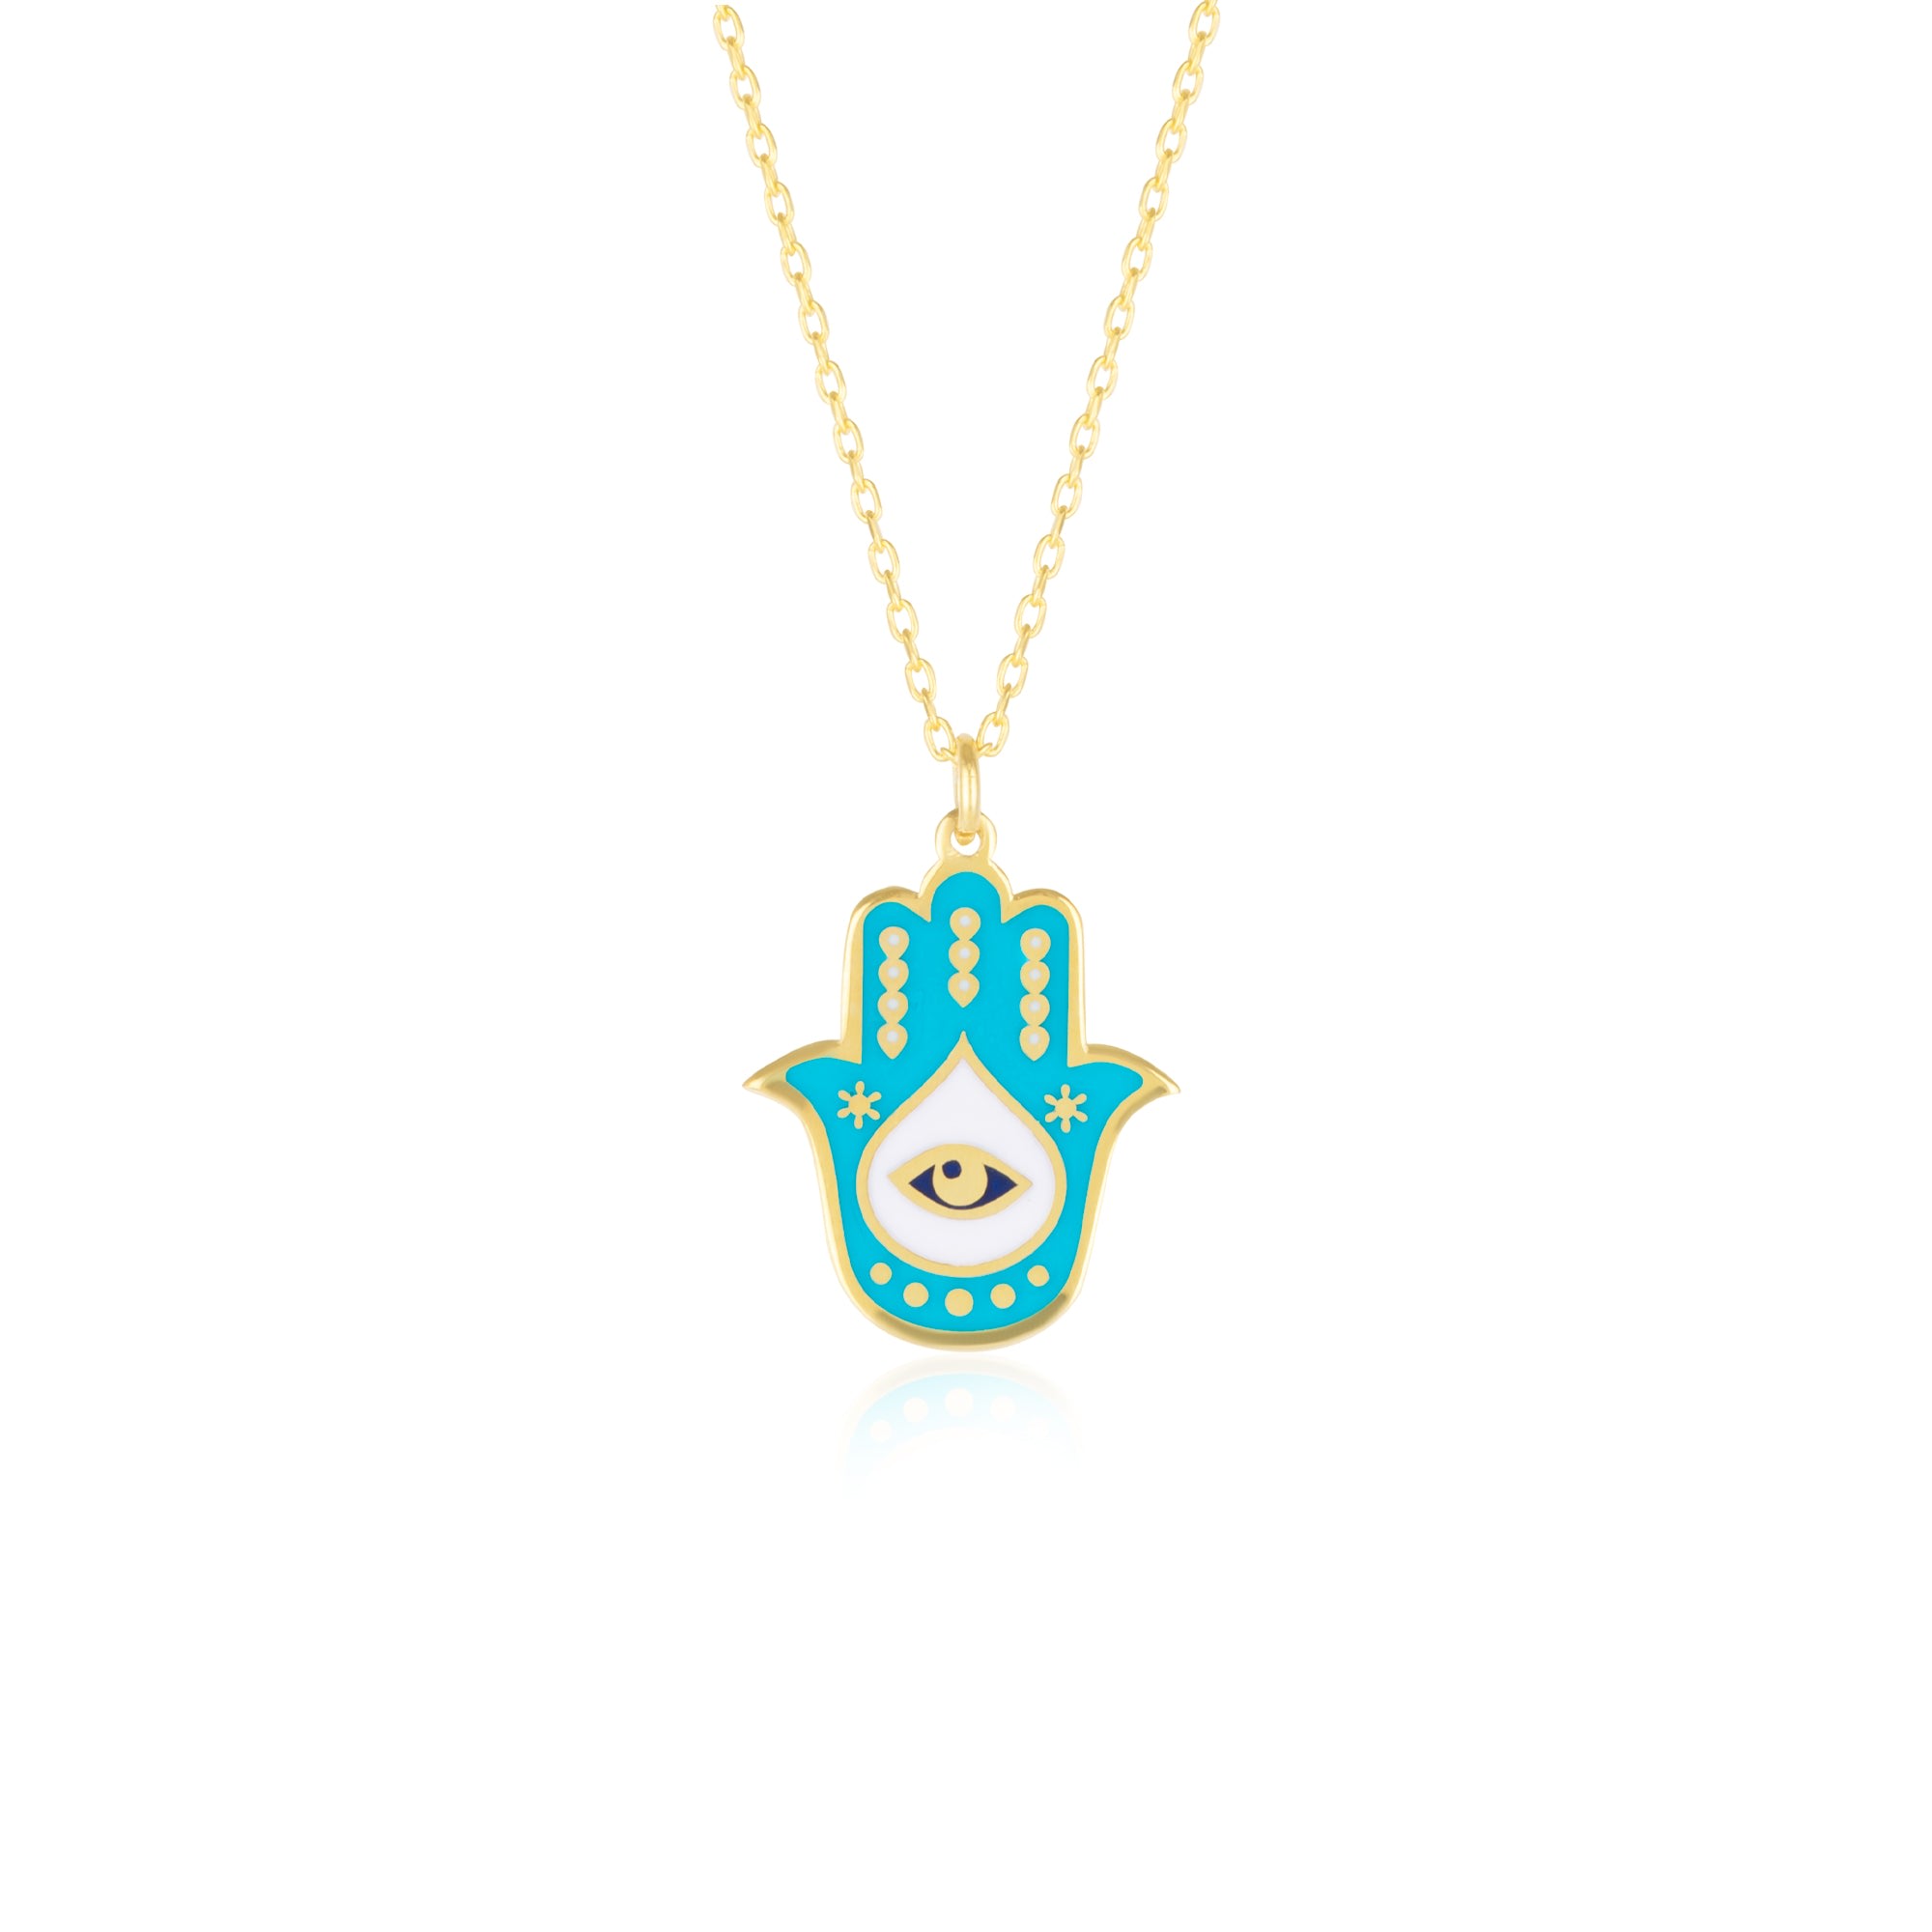 Spero London Women's Gold Authentic Turquoise Color Hamsa Hand Necklace Sterling Silver In Blue